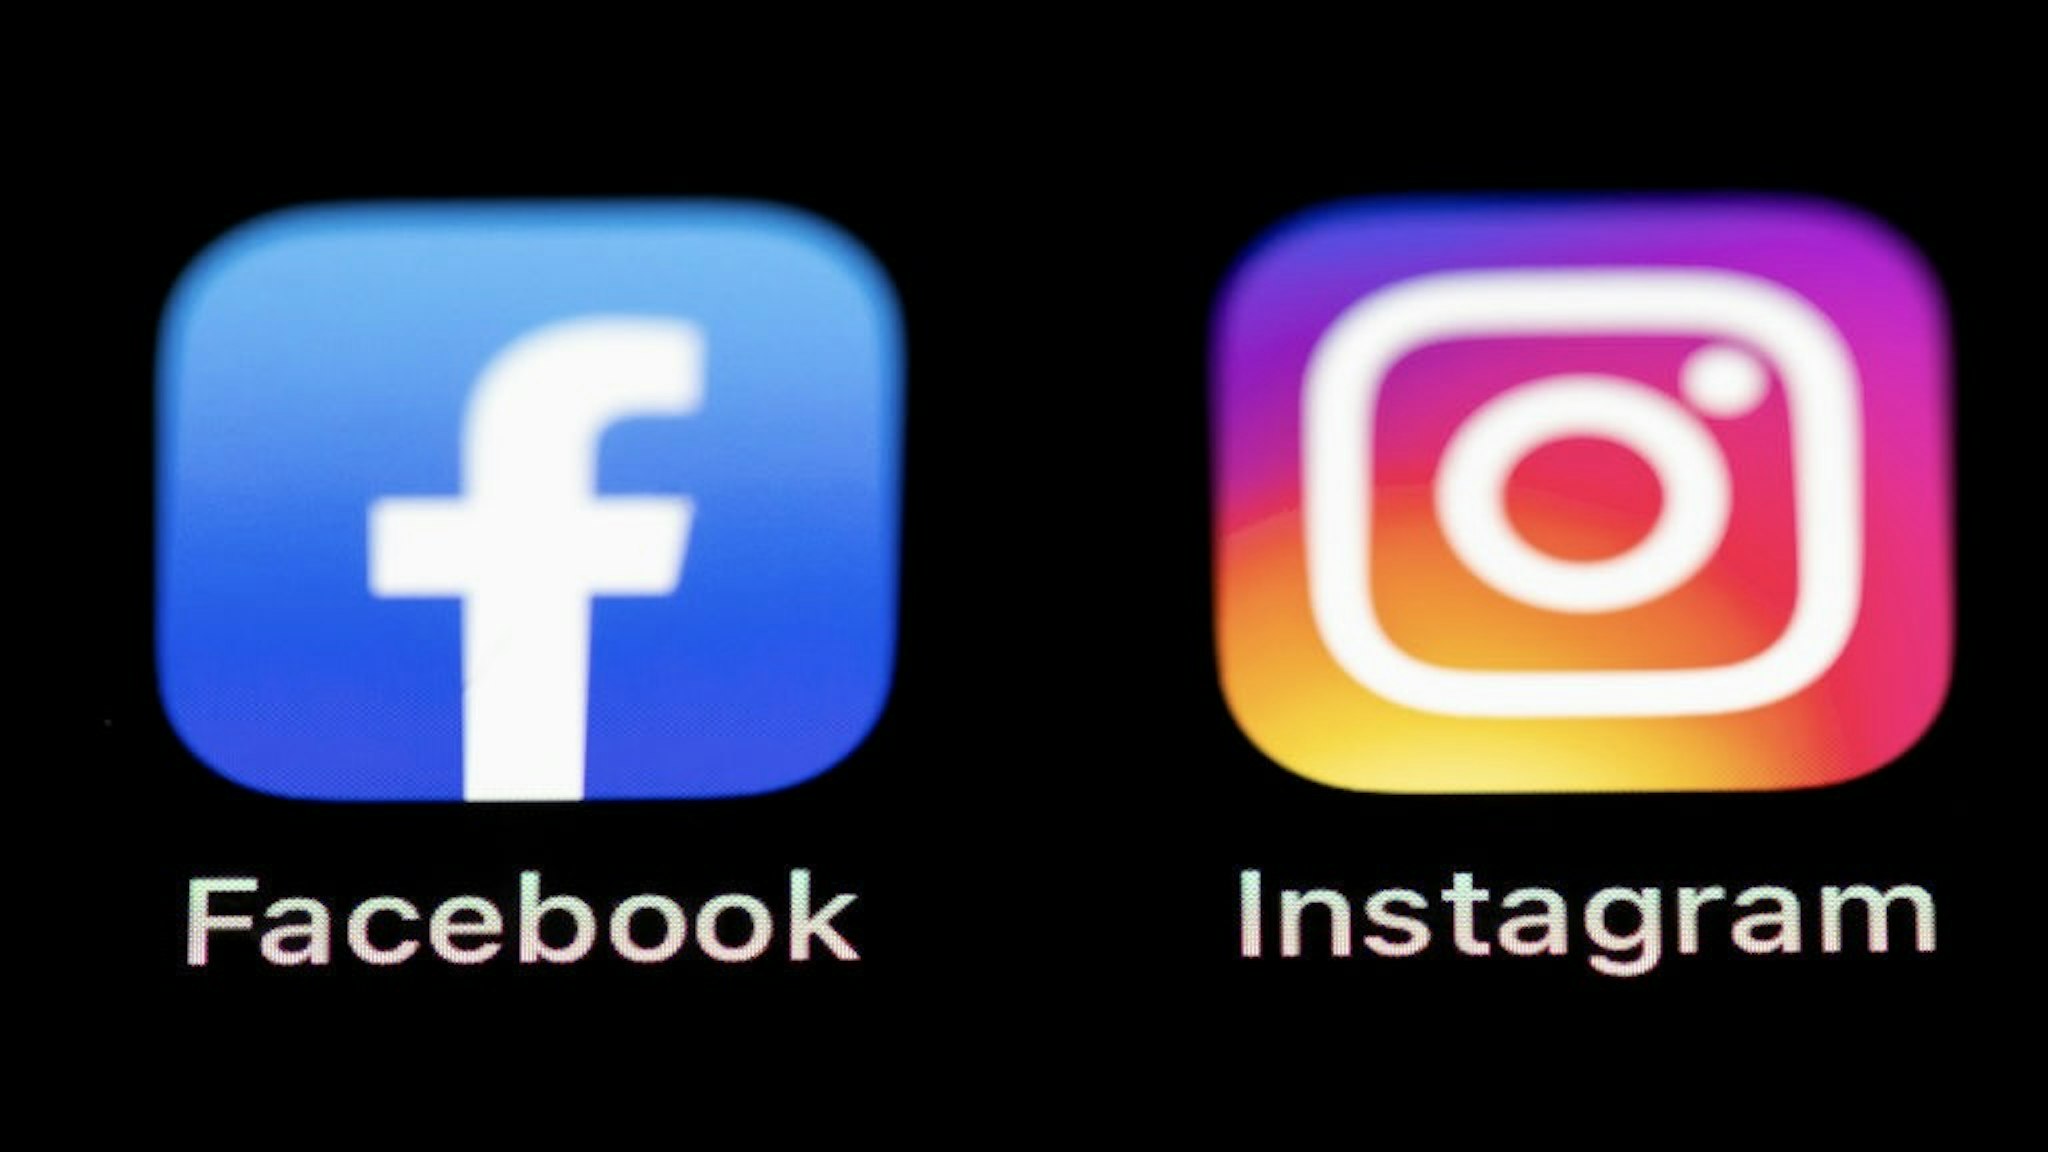 Social Media Apps KIRCHHEIM UNTER TECK, GERMANY - MARCH 09: (BILD ZEITUNG OUT) In this photo illustration, The Facebook and Instagram logos on the screen of an iPhone on March 09, 2021 in Kirchheim unter Teck, Germany. (Photo by Tom Weller/DeFodi Images via Getty Images) DeFodi Images / Contributor via Getty Images